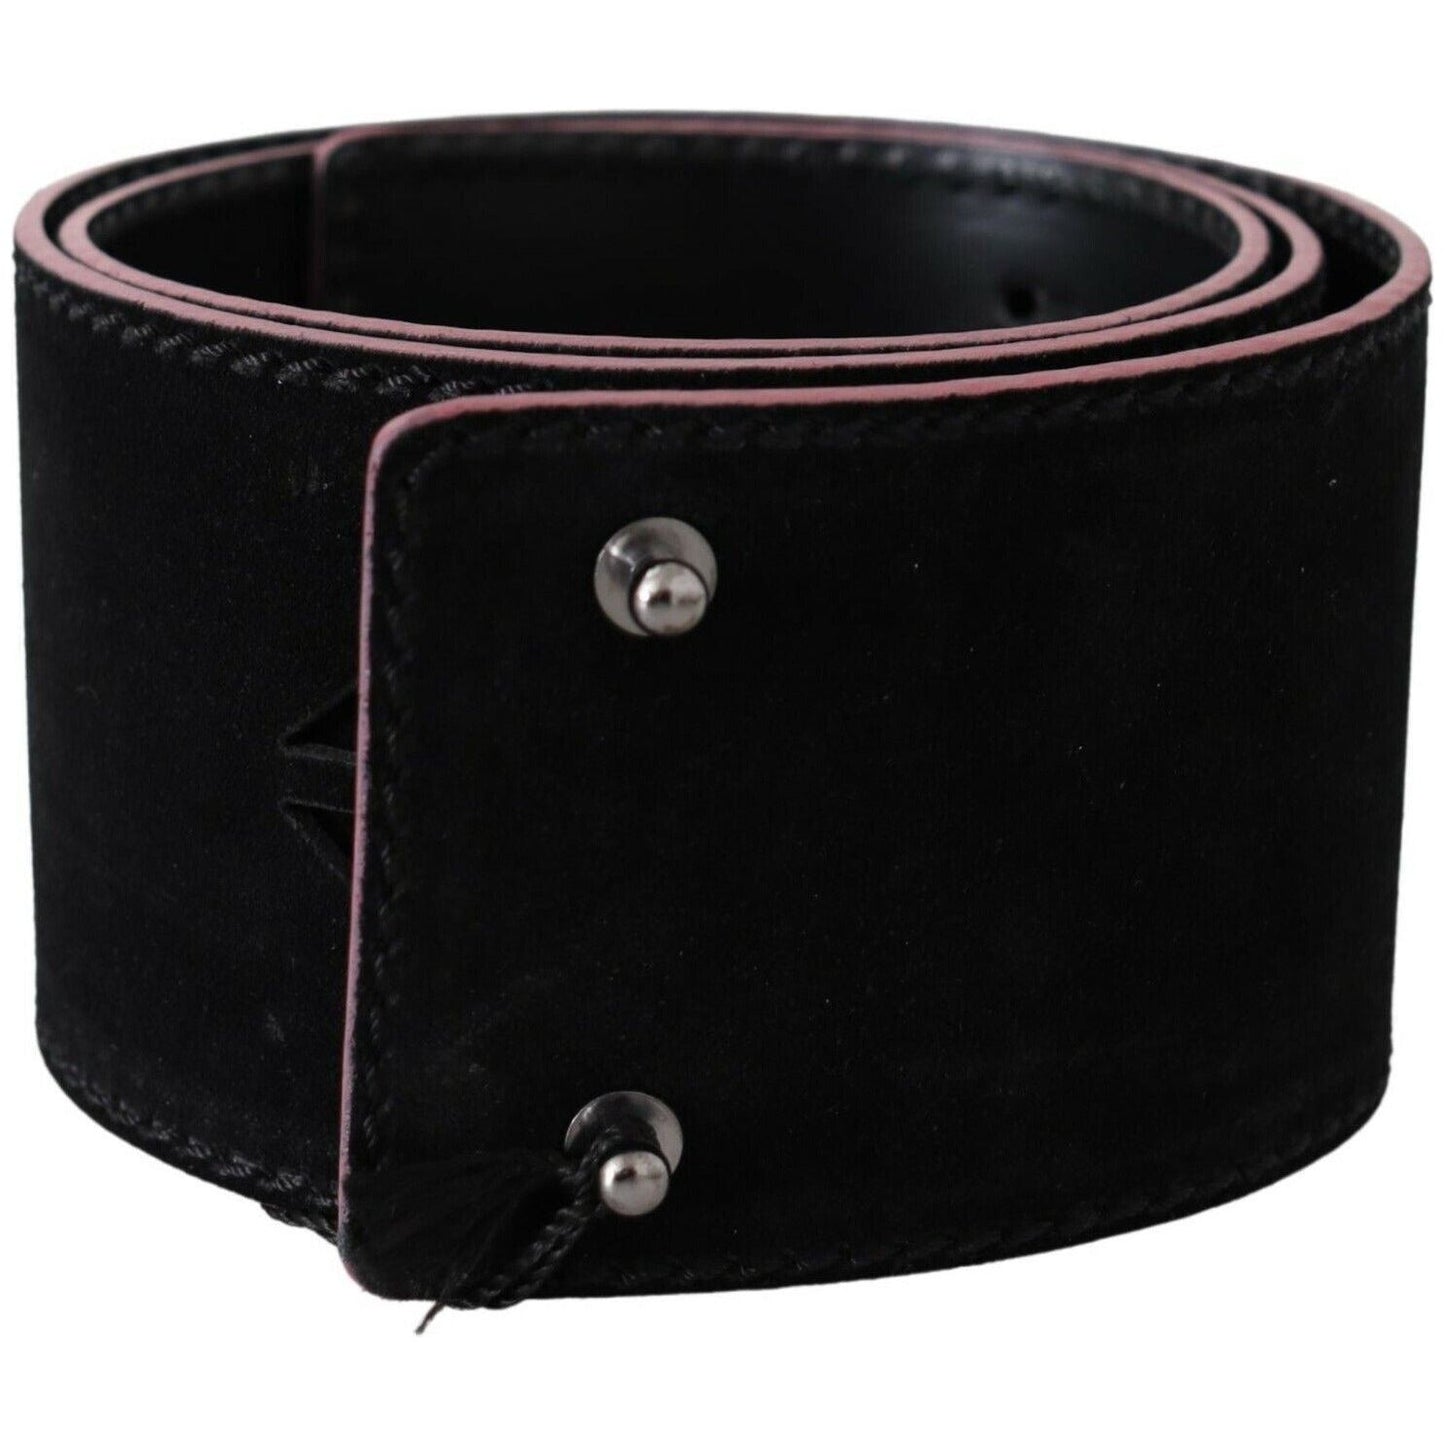 Costume National Elegant Wide Leather Fashion Belt with Metal Accents black-leather-wide-waist-studded-women-belt s-l1600-2022-08-19T124436.900-f894a3fd-f56.jpg